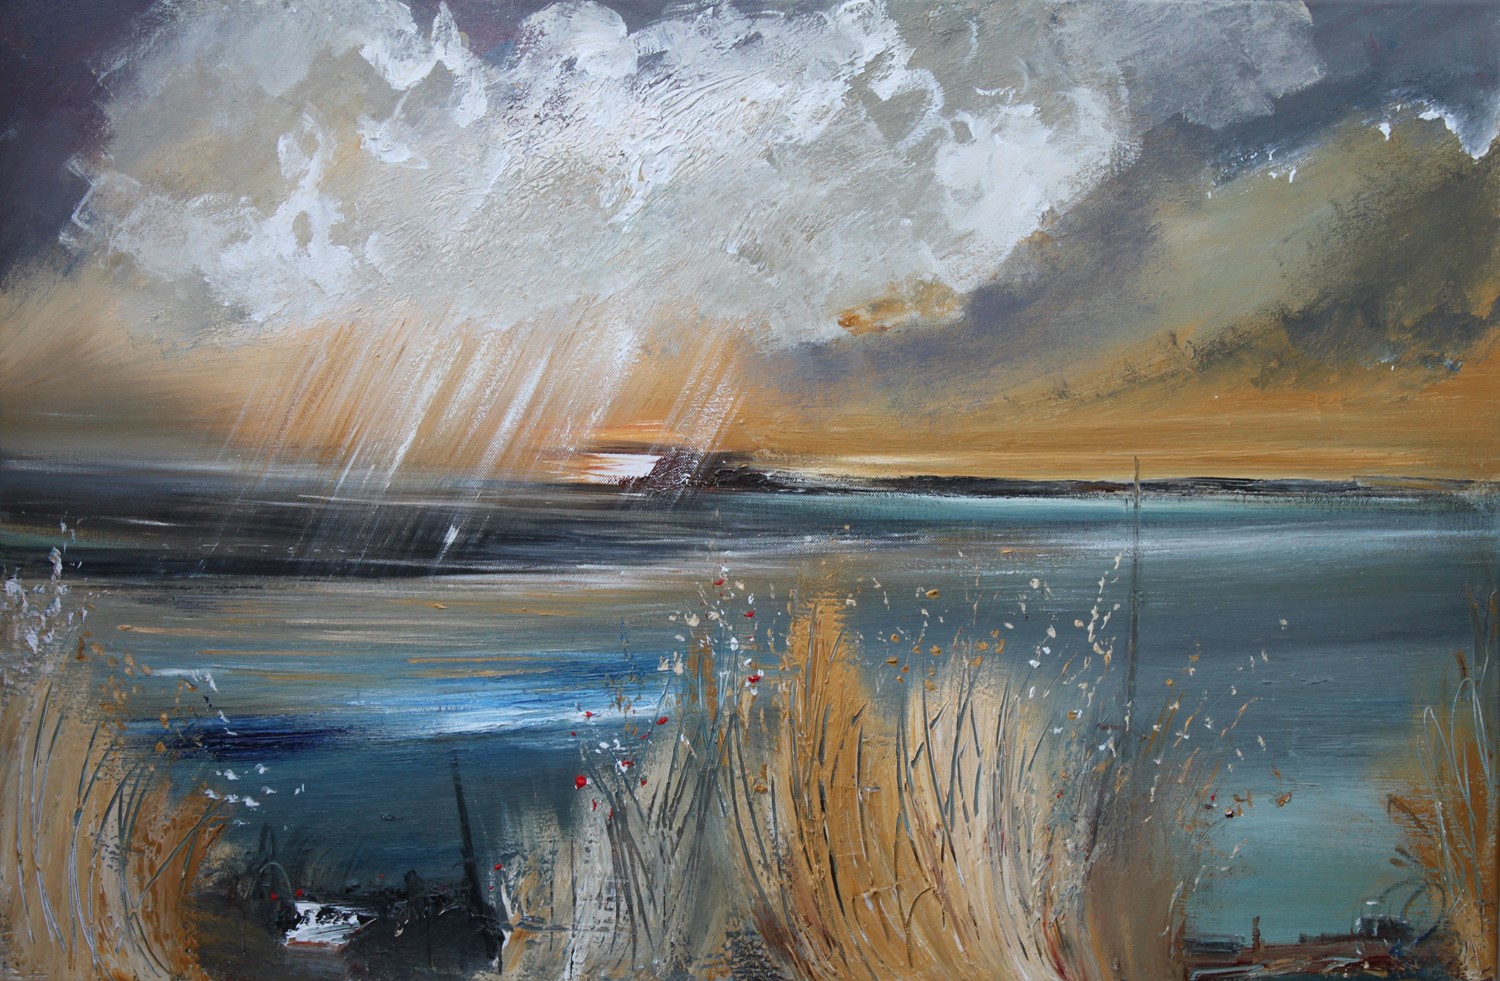 'Washed Ashore' by artist Rosanne Barr